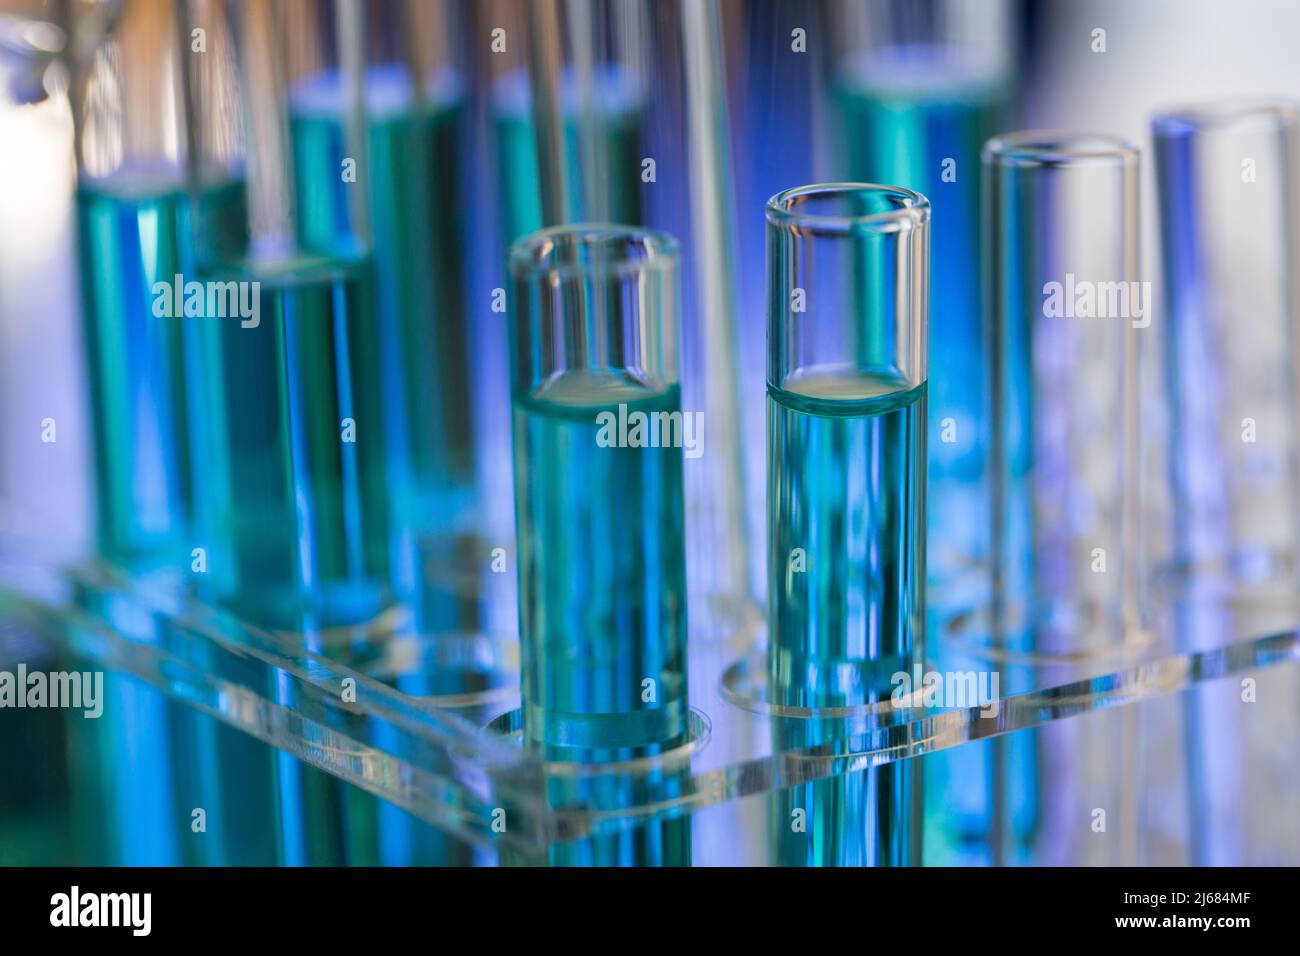 Neatly arranged test tubes containing blue reagent in chemistry laboratory - stock photo Stock Photo